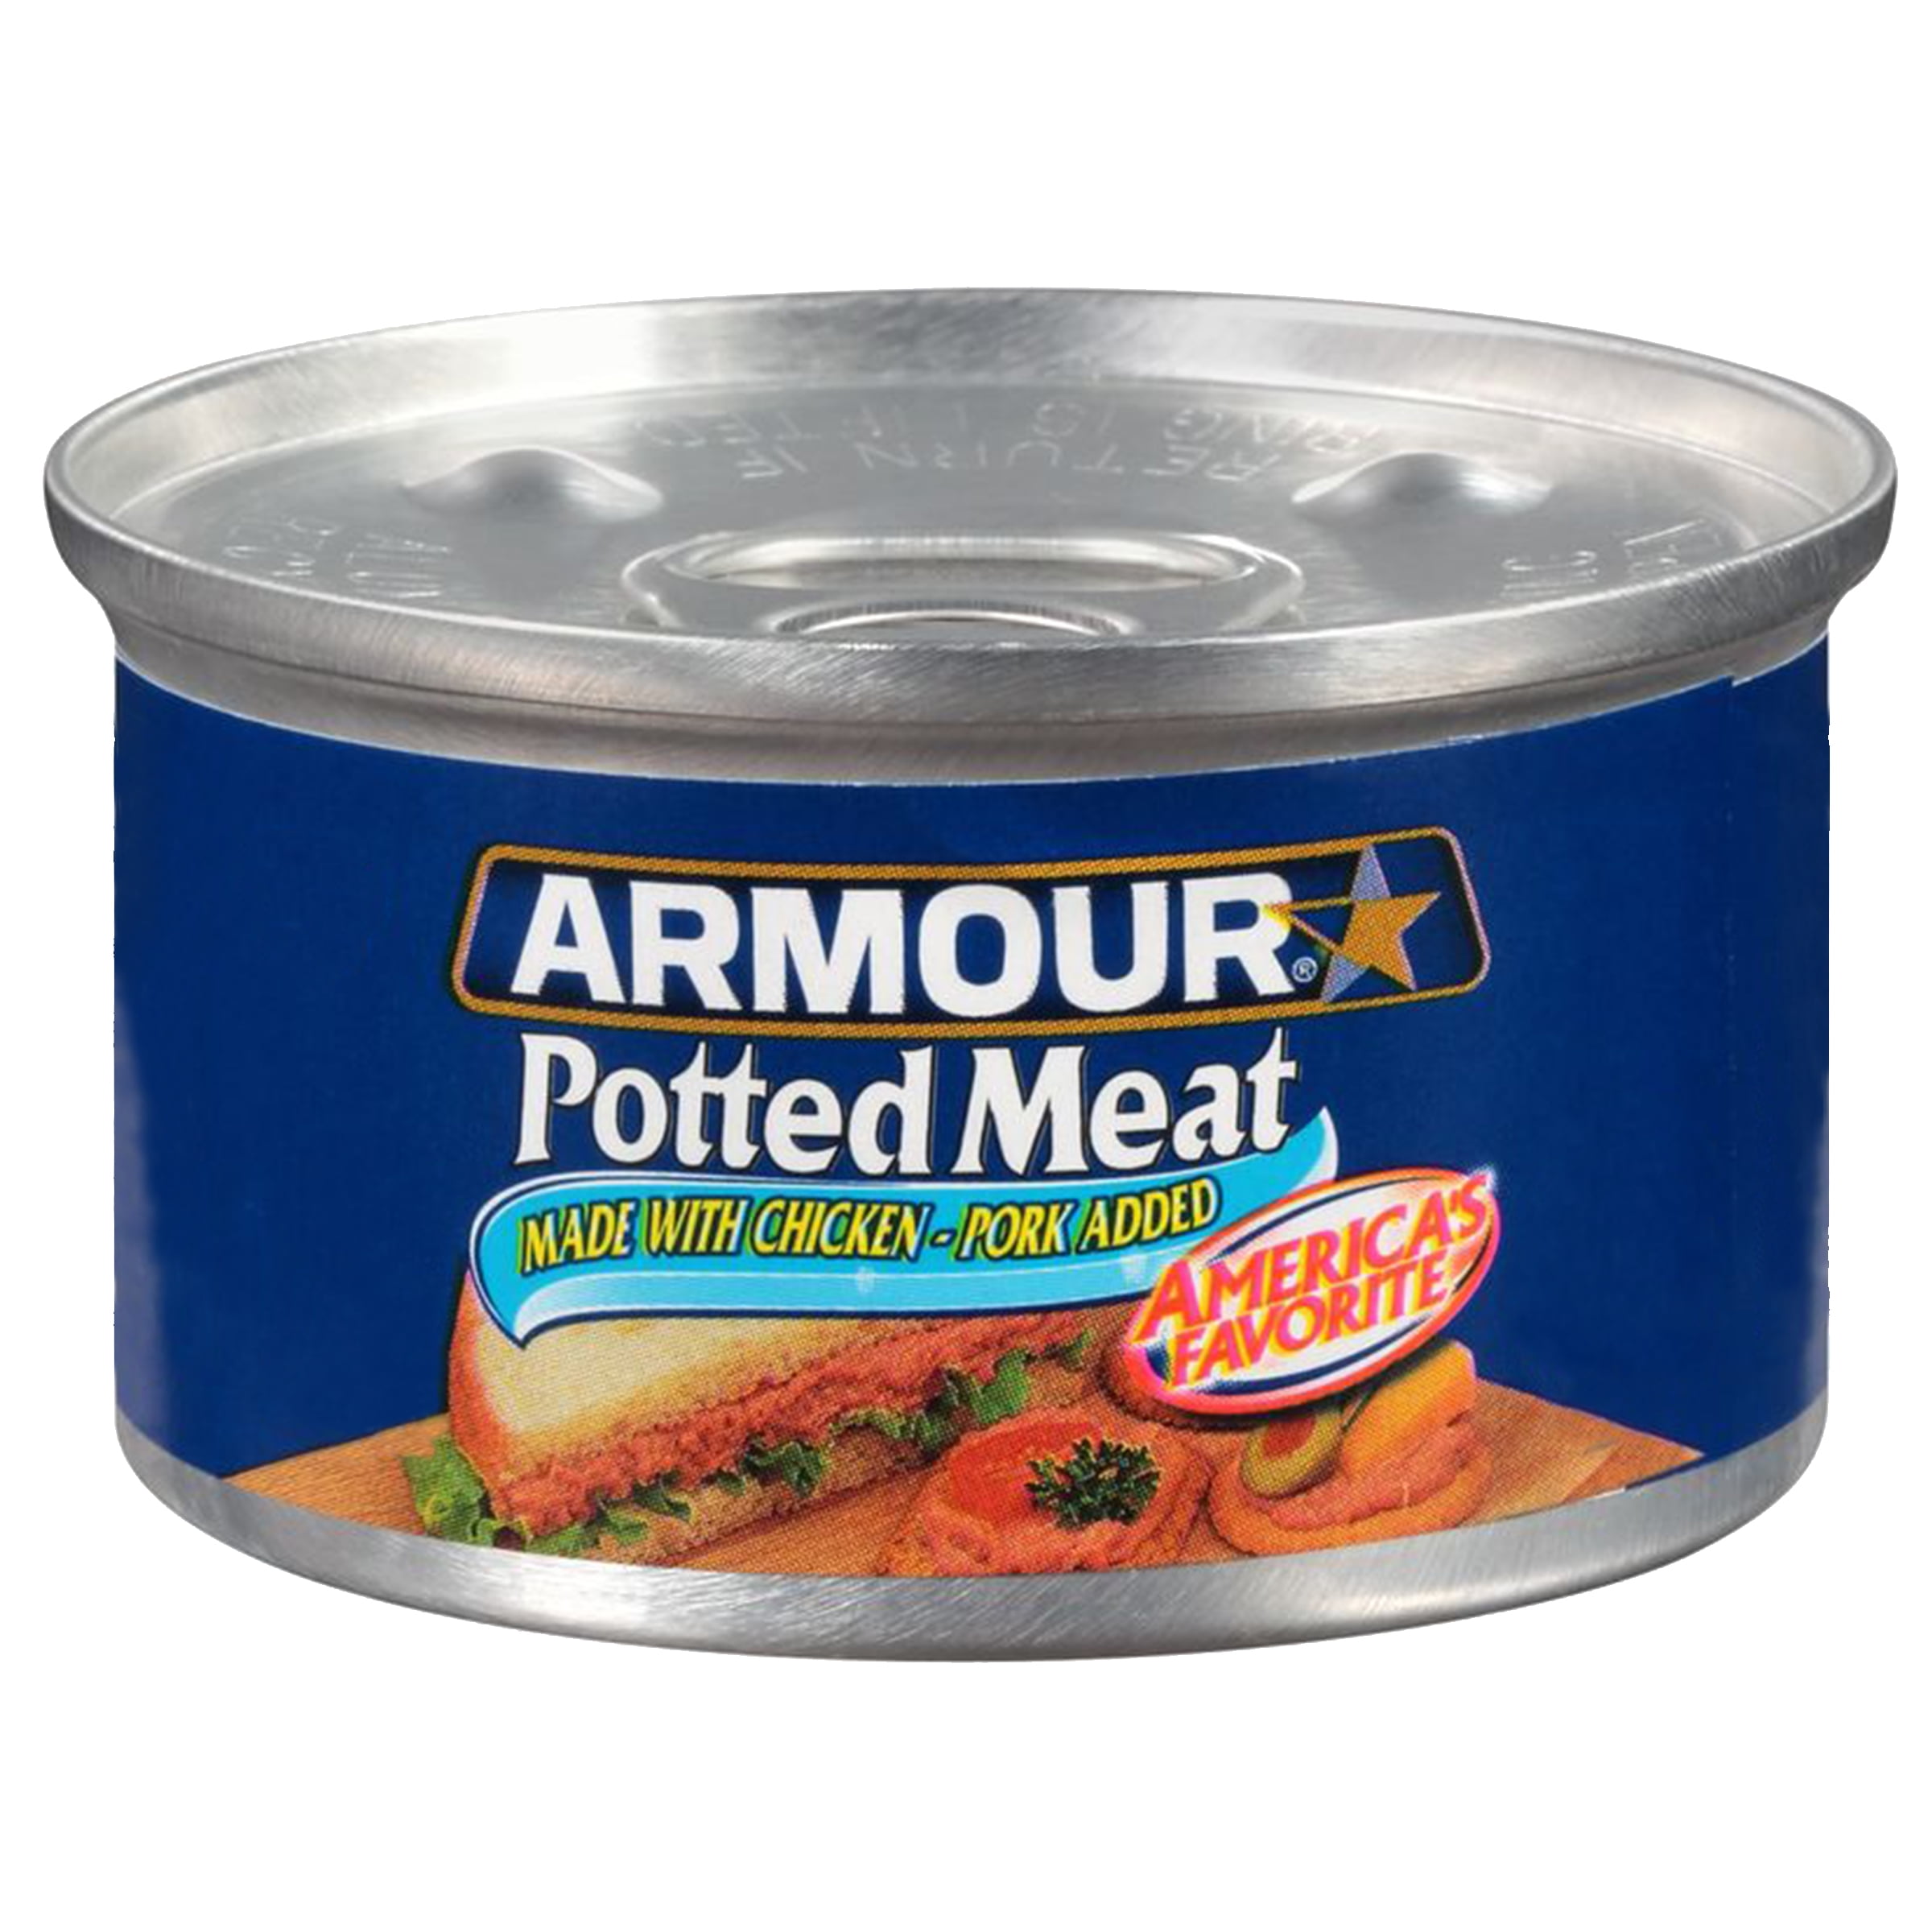 Made for meat. Potted meat. Canned meat. Meat Pot spotliatoes GHT 3. A can of meat.